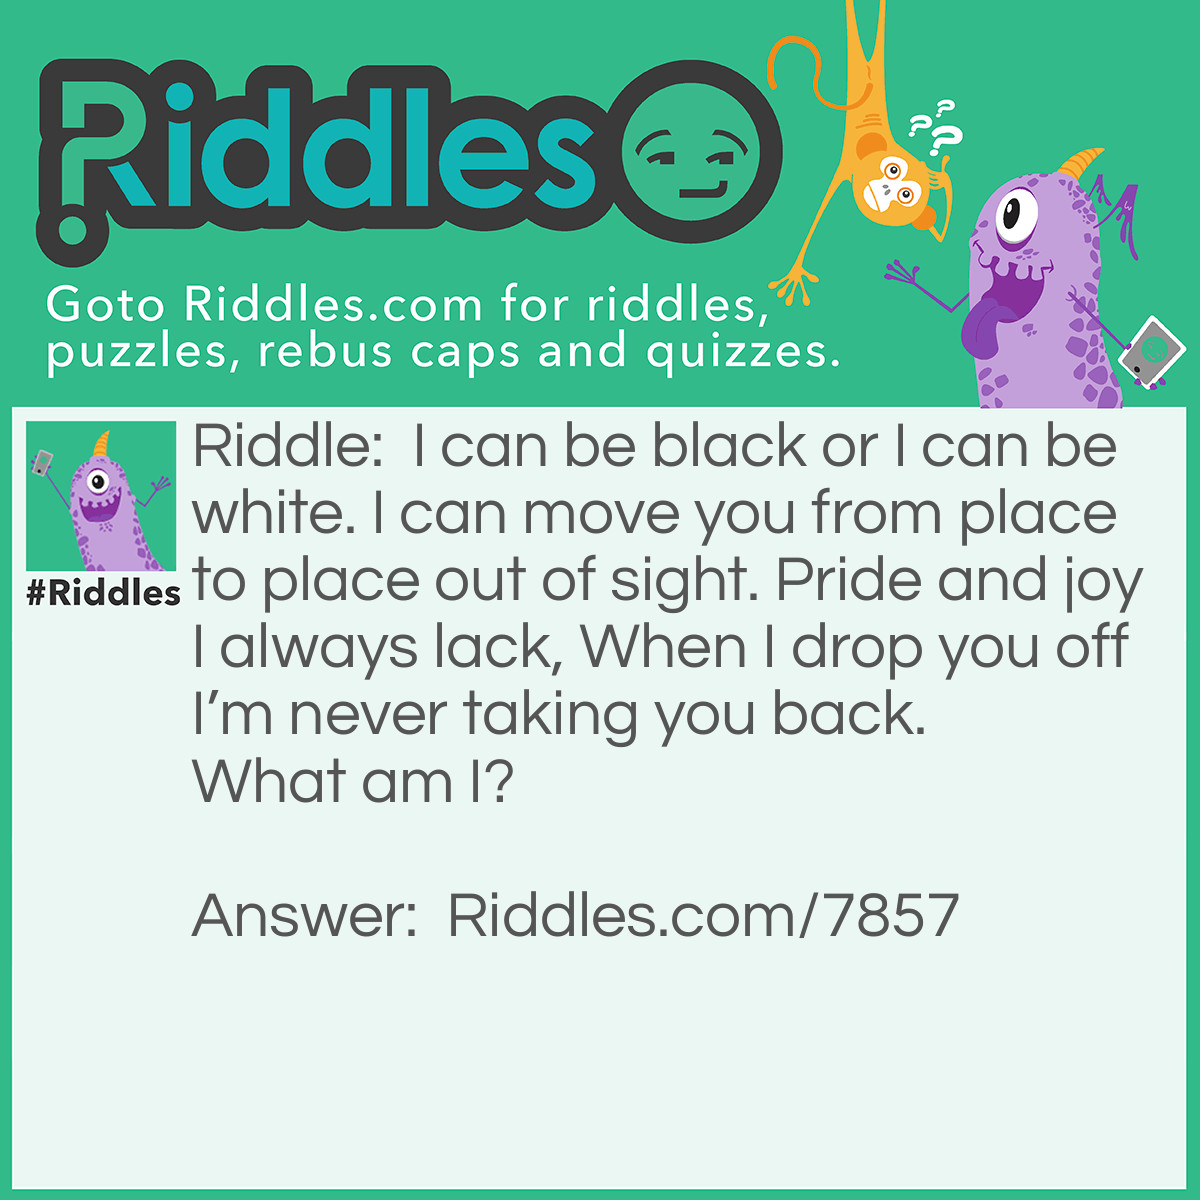 Riddle: I can be black or I can be white. I can move you from place to place out of sight. Pride and joy I always lack, When I drop you off I'm never taking you back. What am I? Answer: Hearse